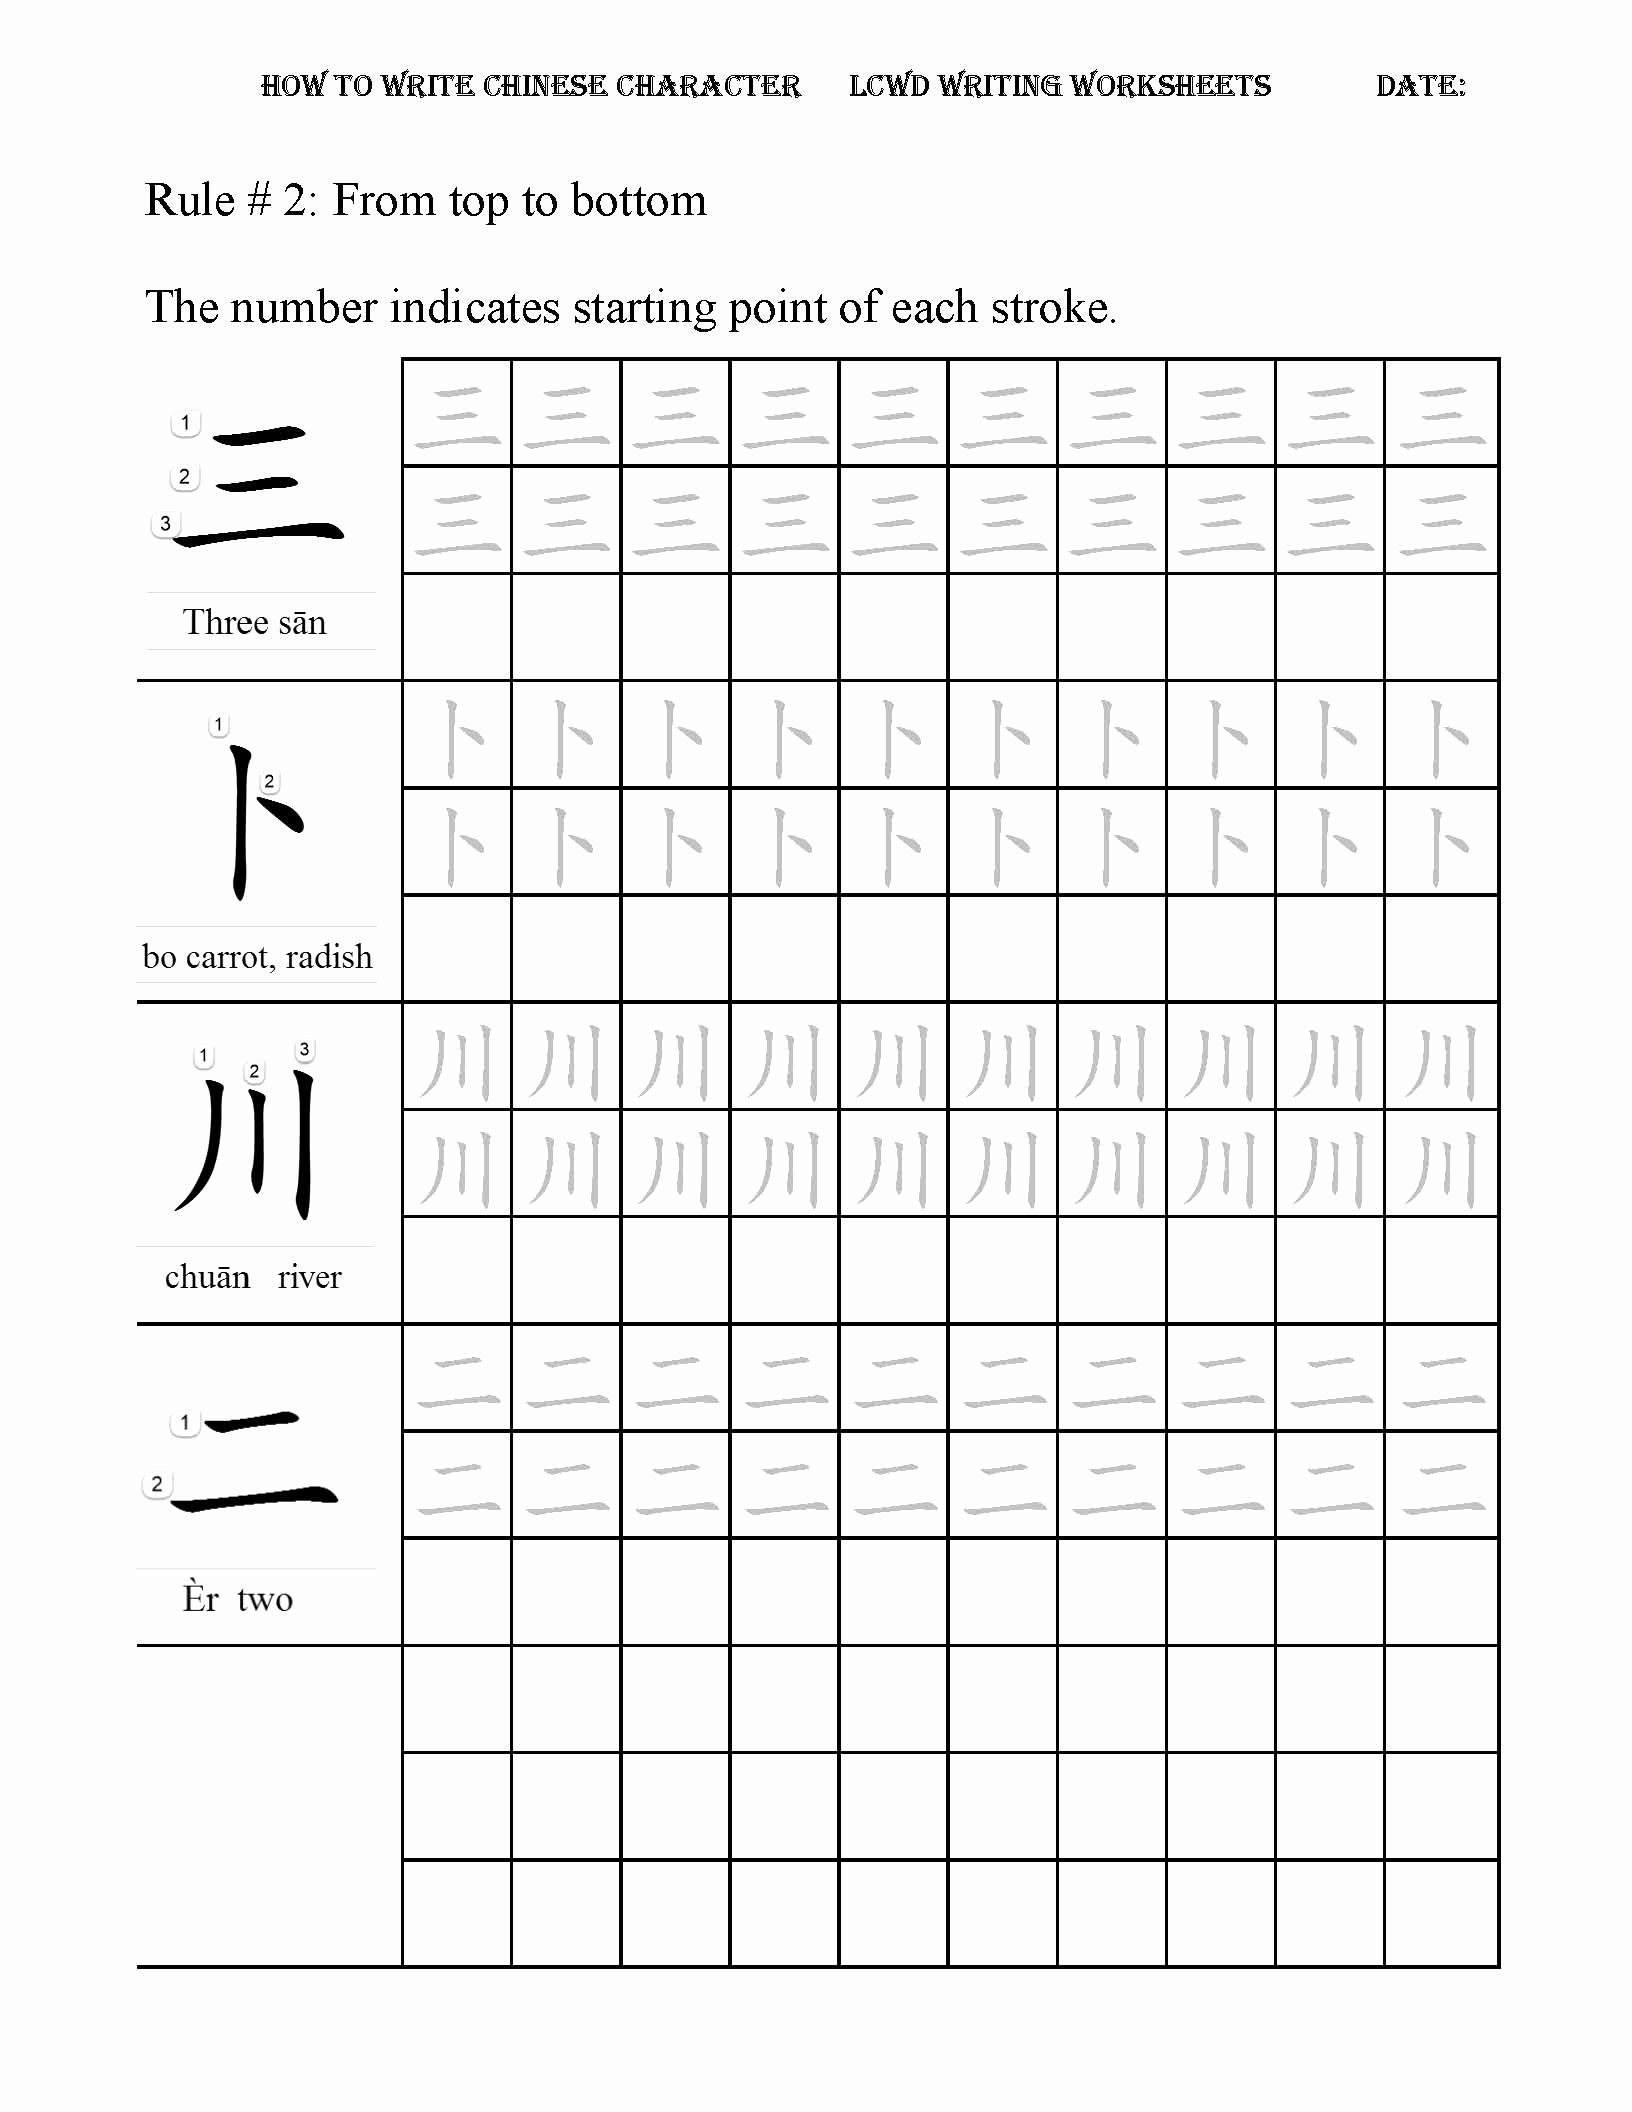 Learning Chinese Worksheets Beautiful How to Write Chinese Character 18 Rules Writing Worksheets